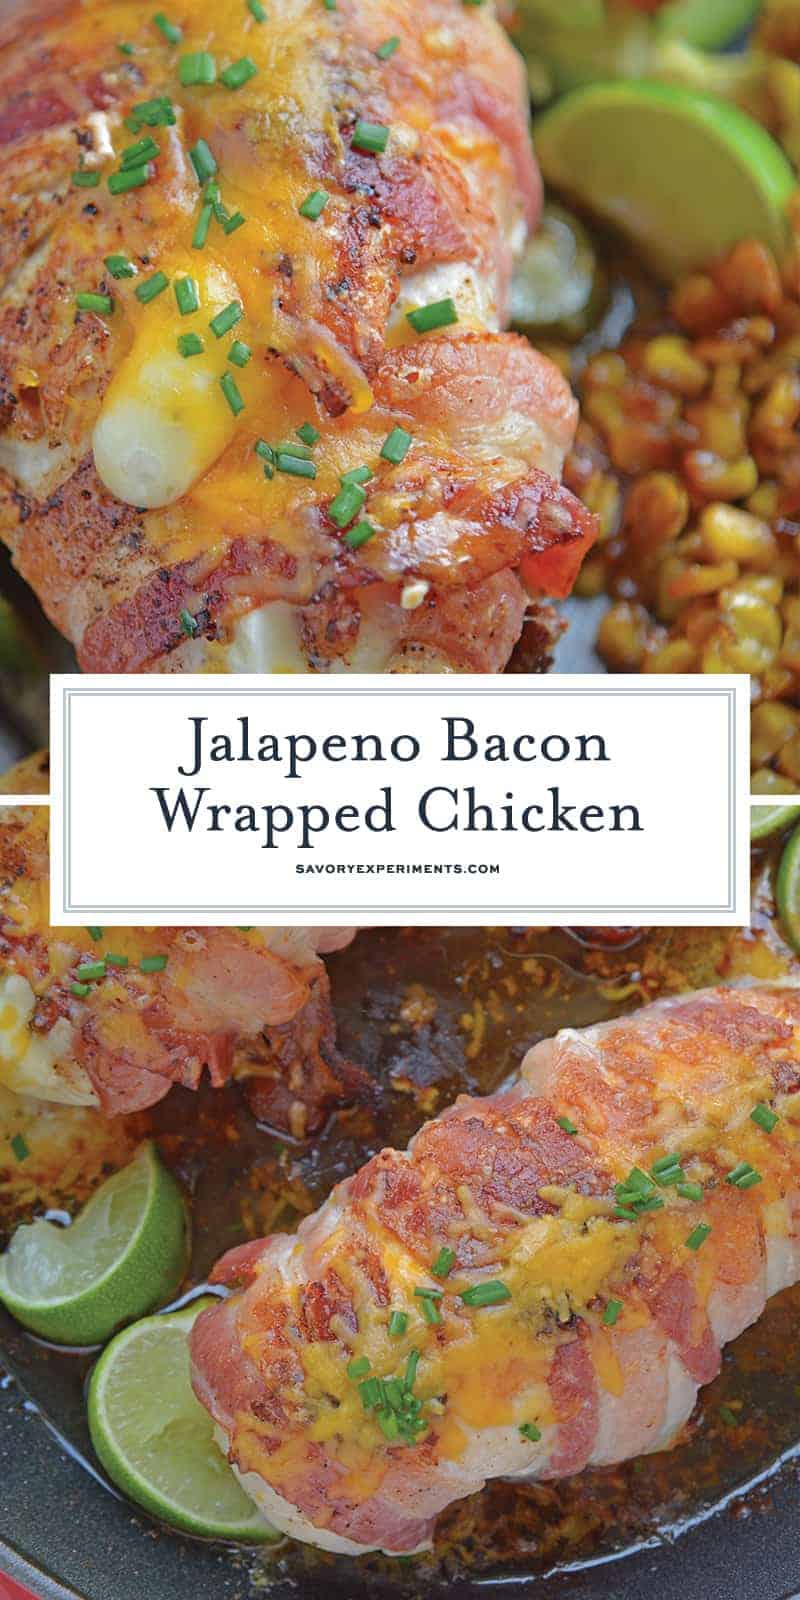 Jalapeno Bacon Wrapped Chicken is a cheese stuffed chicken breast recipe using three cheeses and fresh jalapenos. Avocado and lime cool off the hot flavors. #baconwrappedchicken #jalapenopopperchicken www.savoryexperiments.com